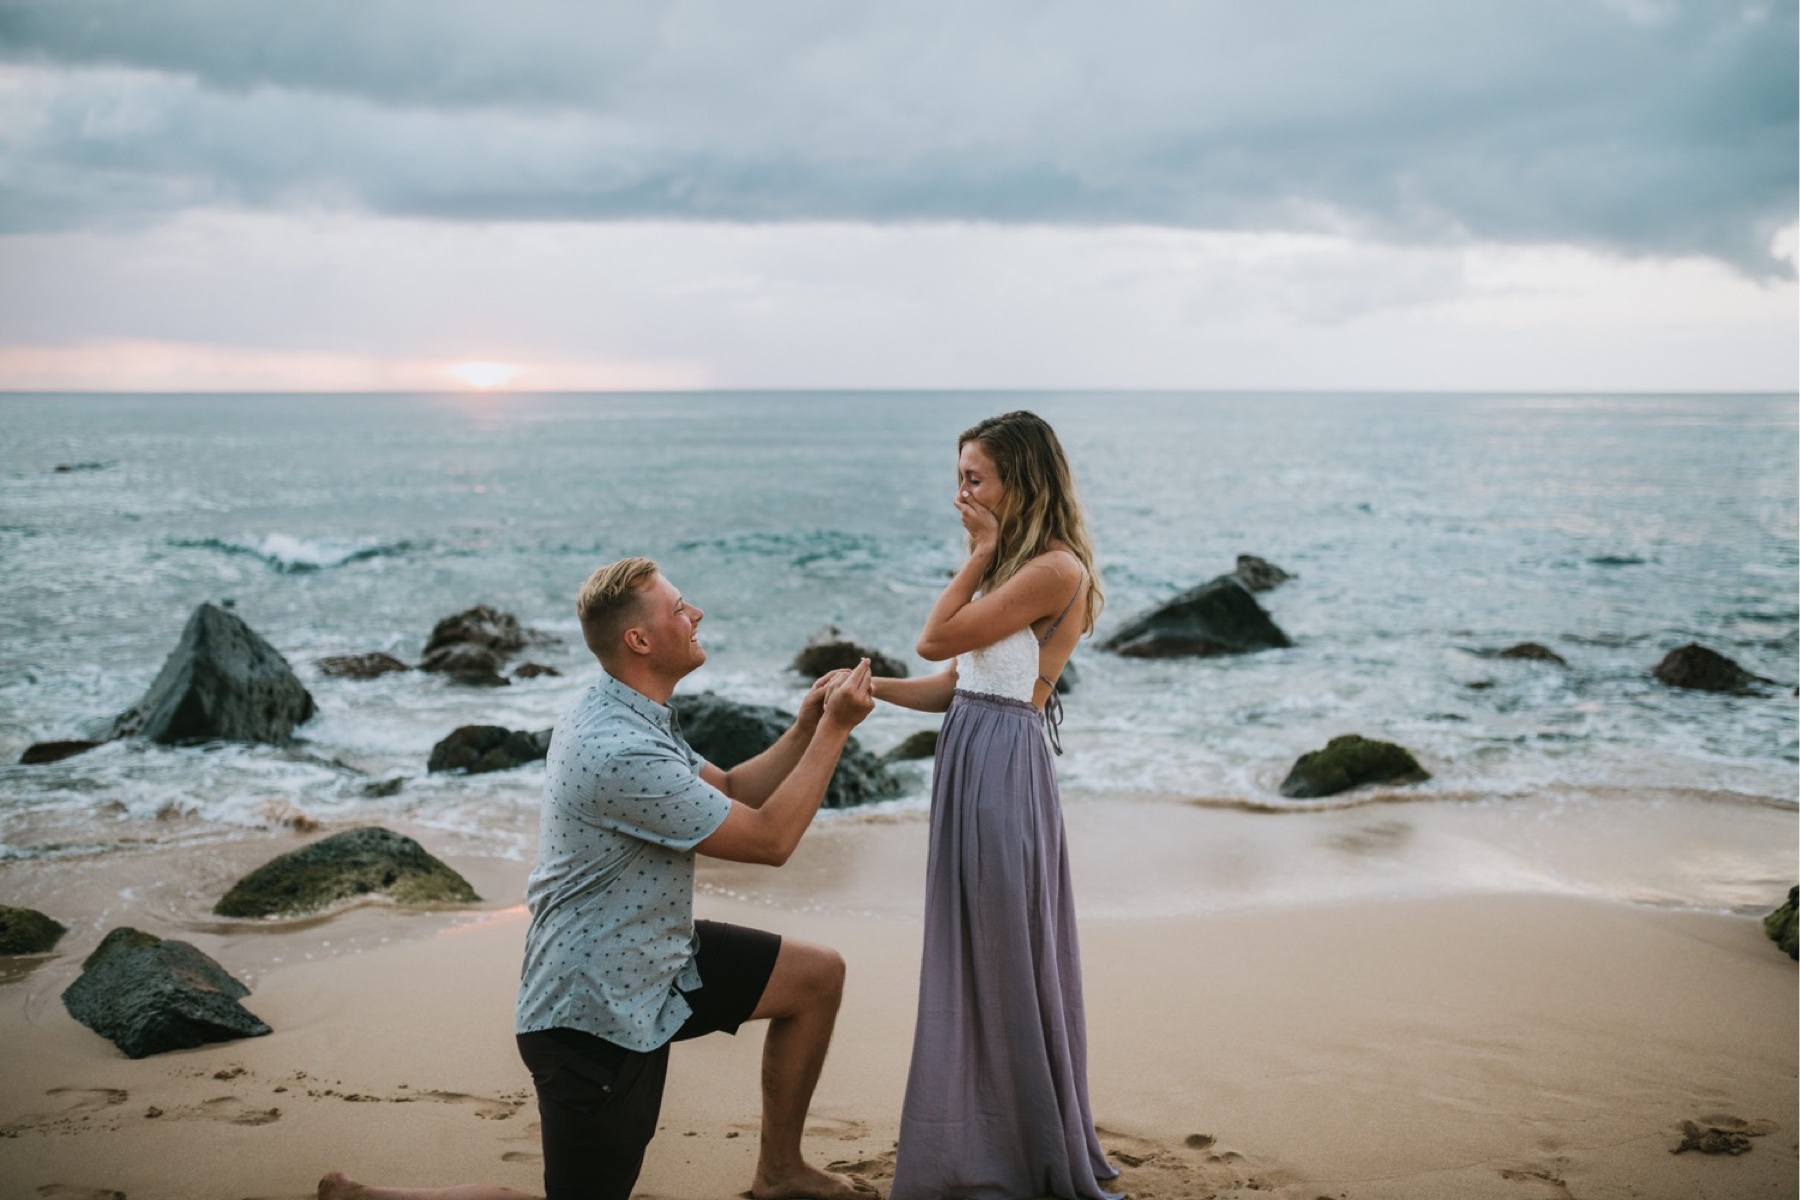 Surprise proposal on the beach in Oahu at Sunset